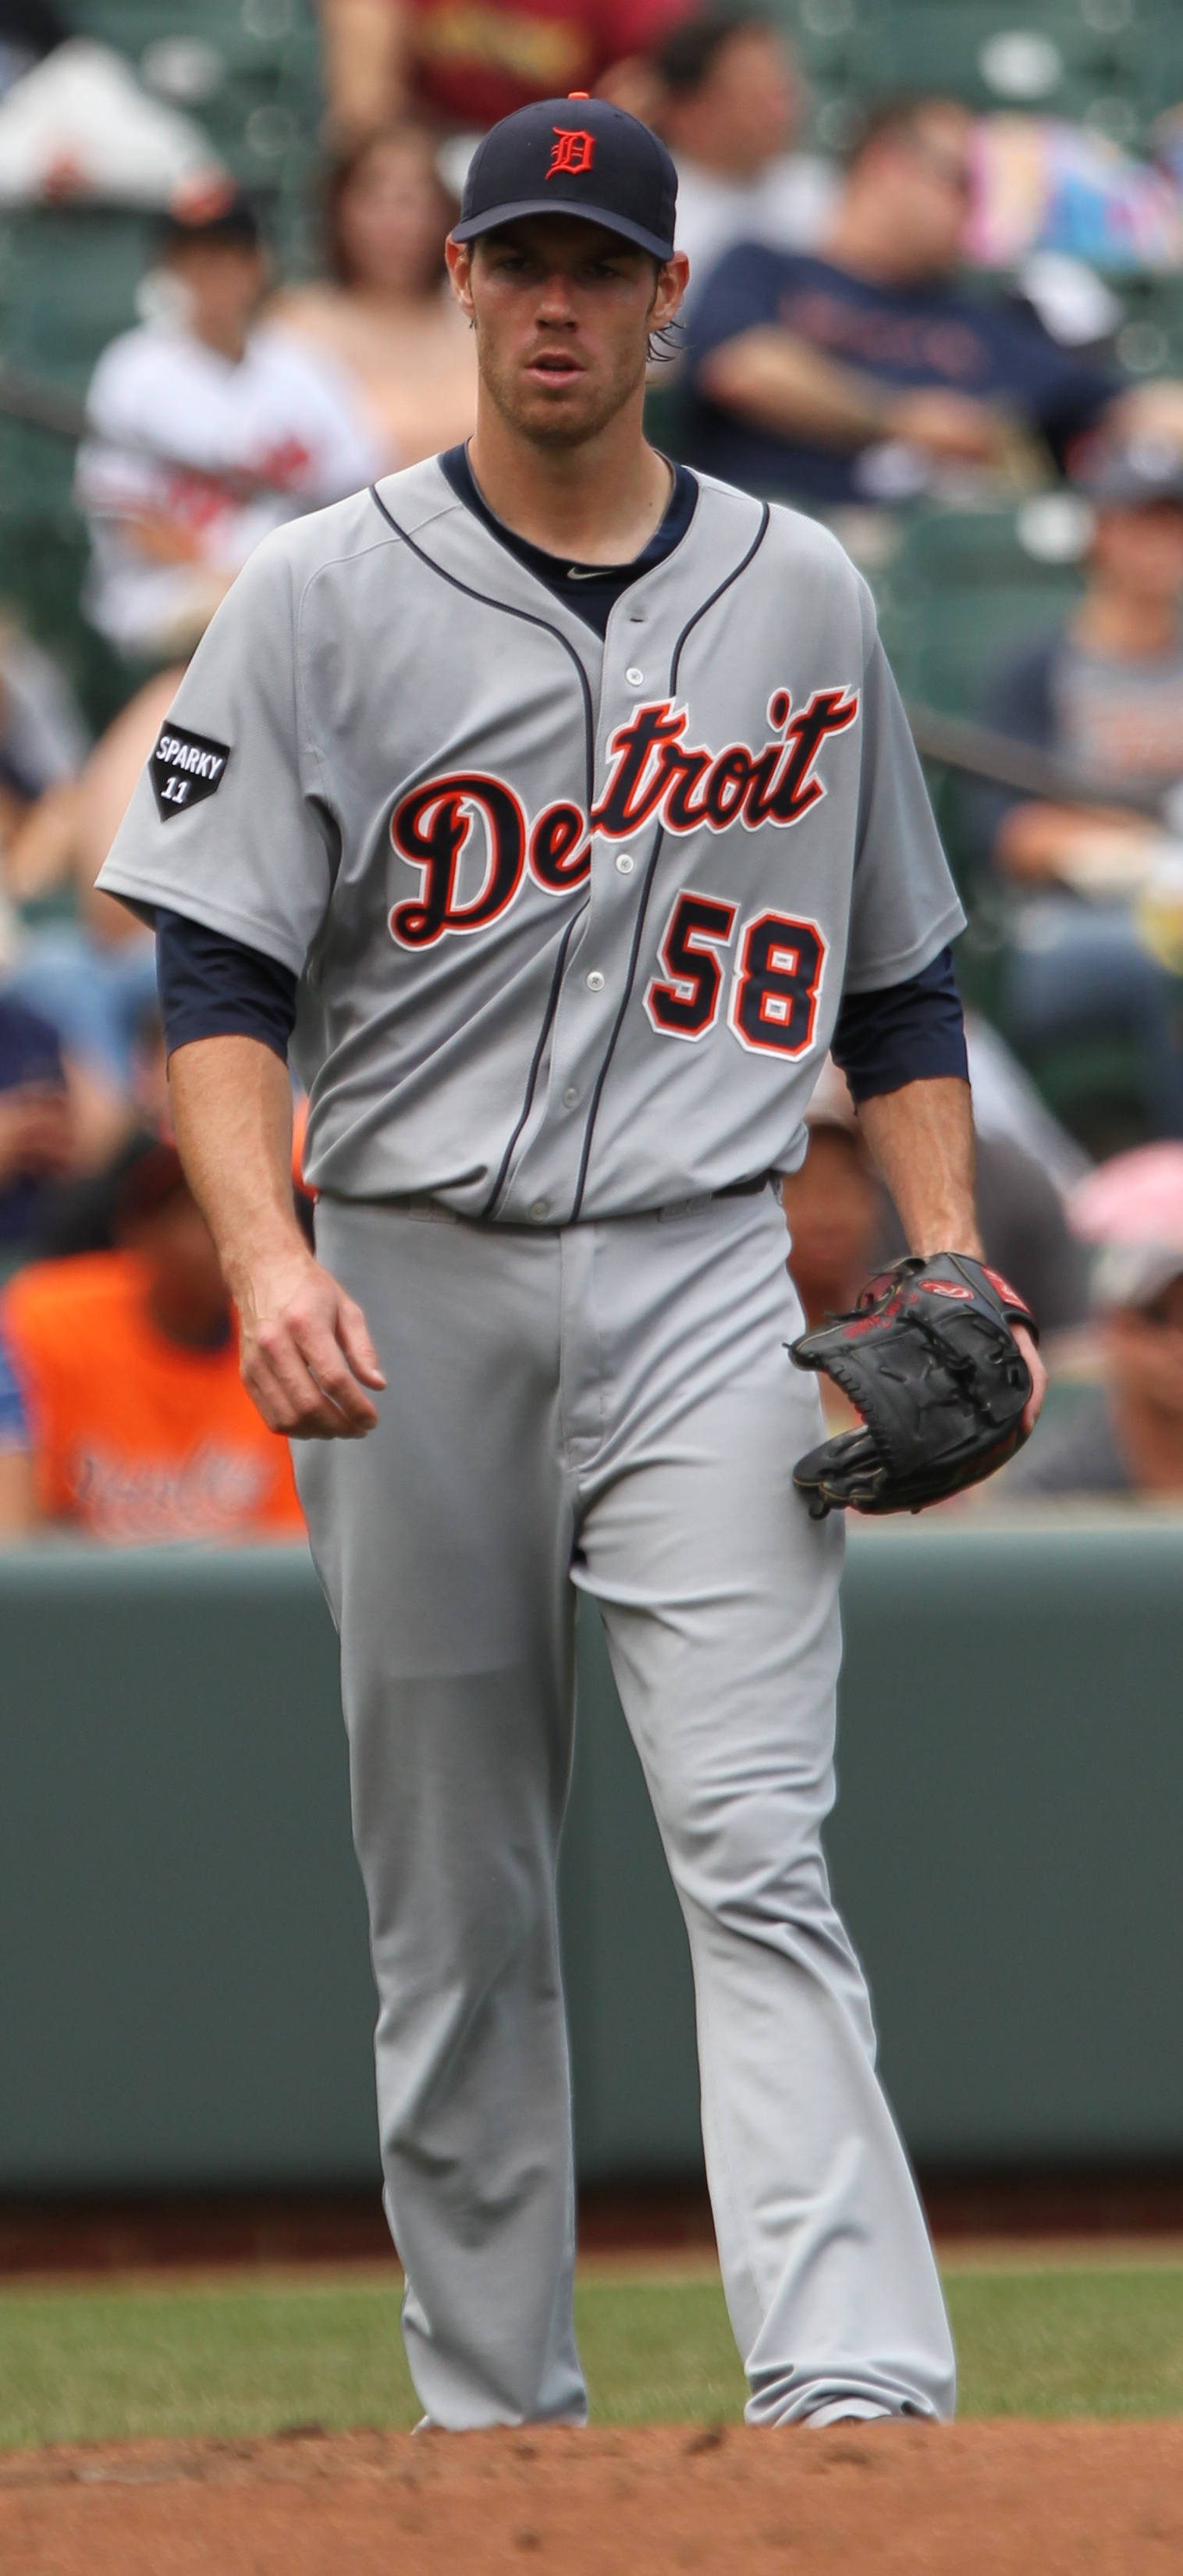 File:DOUG FISTER on August 14, 2011.jpg - Wikipedia, the free ...